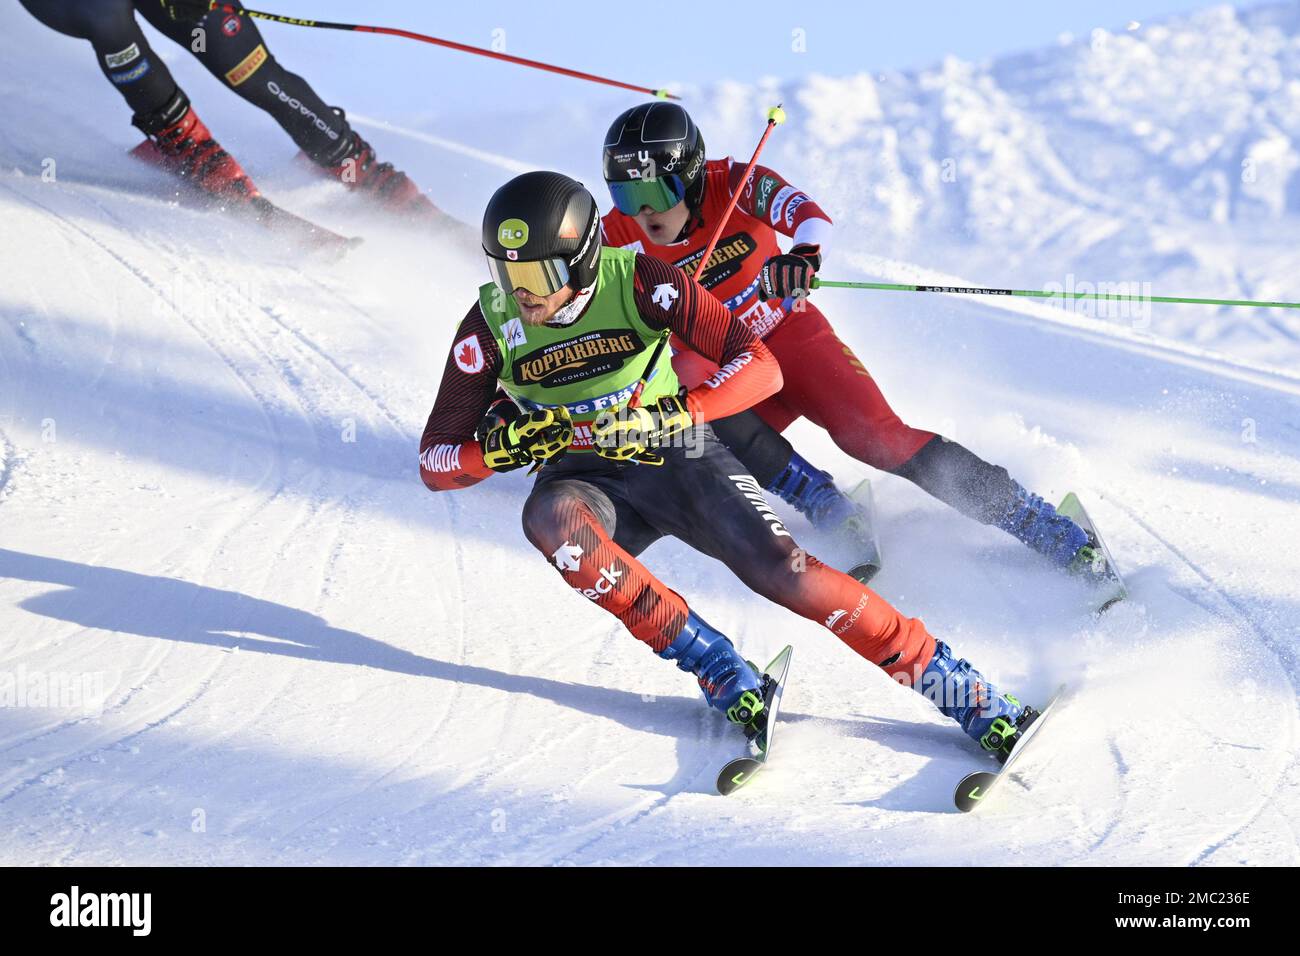 Canada's Jared Schmidt (green) and Japan's Satoshi Furono (red) in action during the men's Ski Cross eighth-finals of the FIS Freestyle Skiing World C Stock Photo